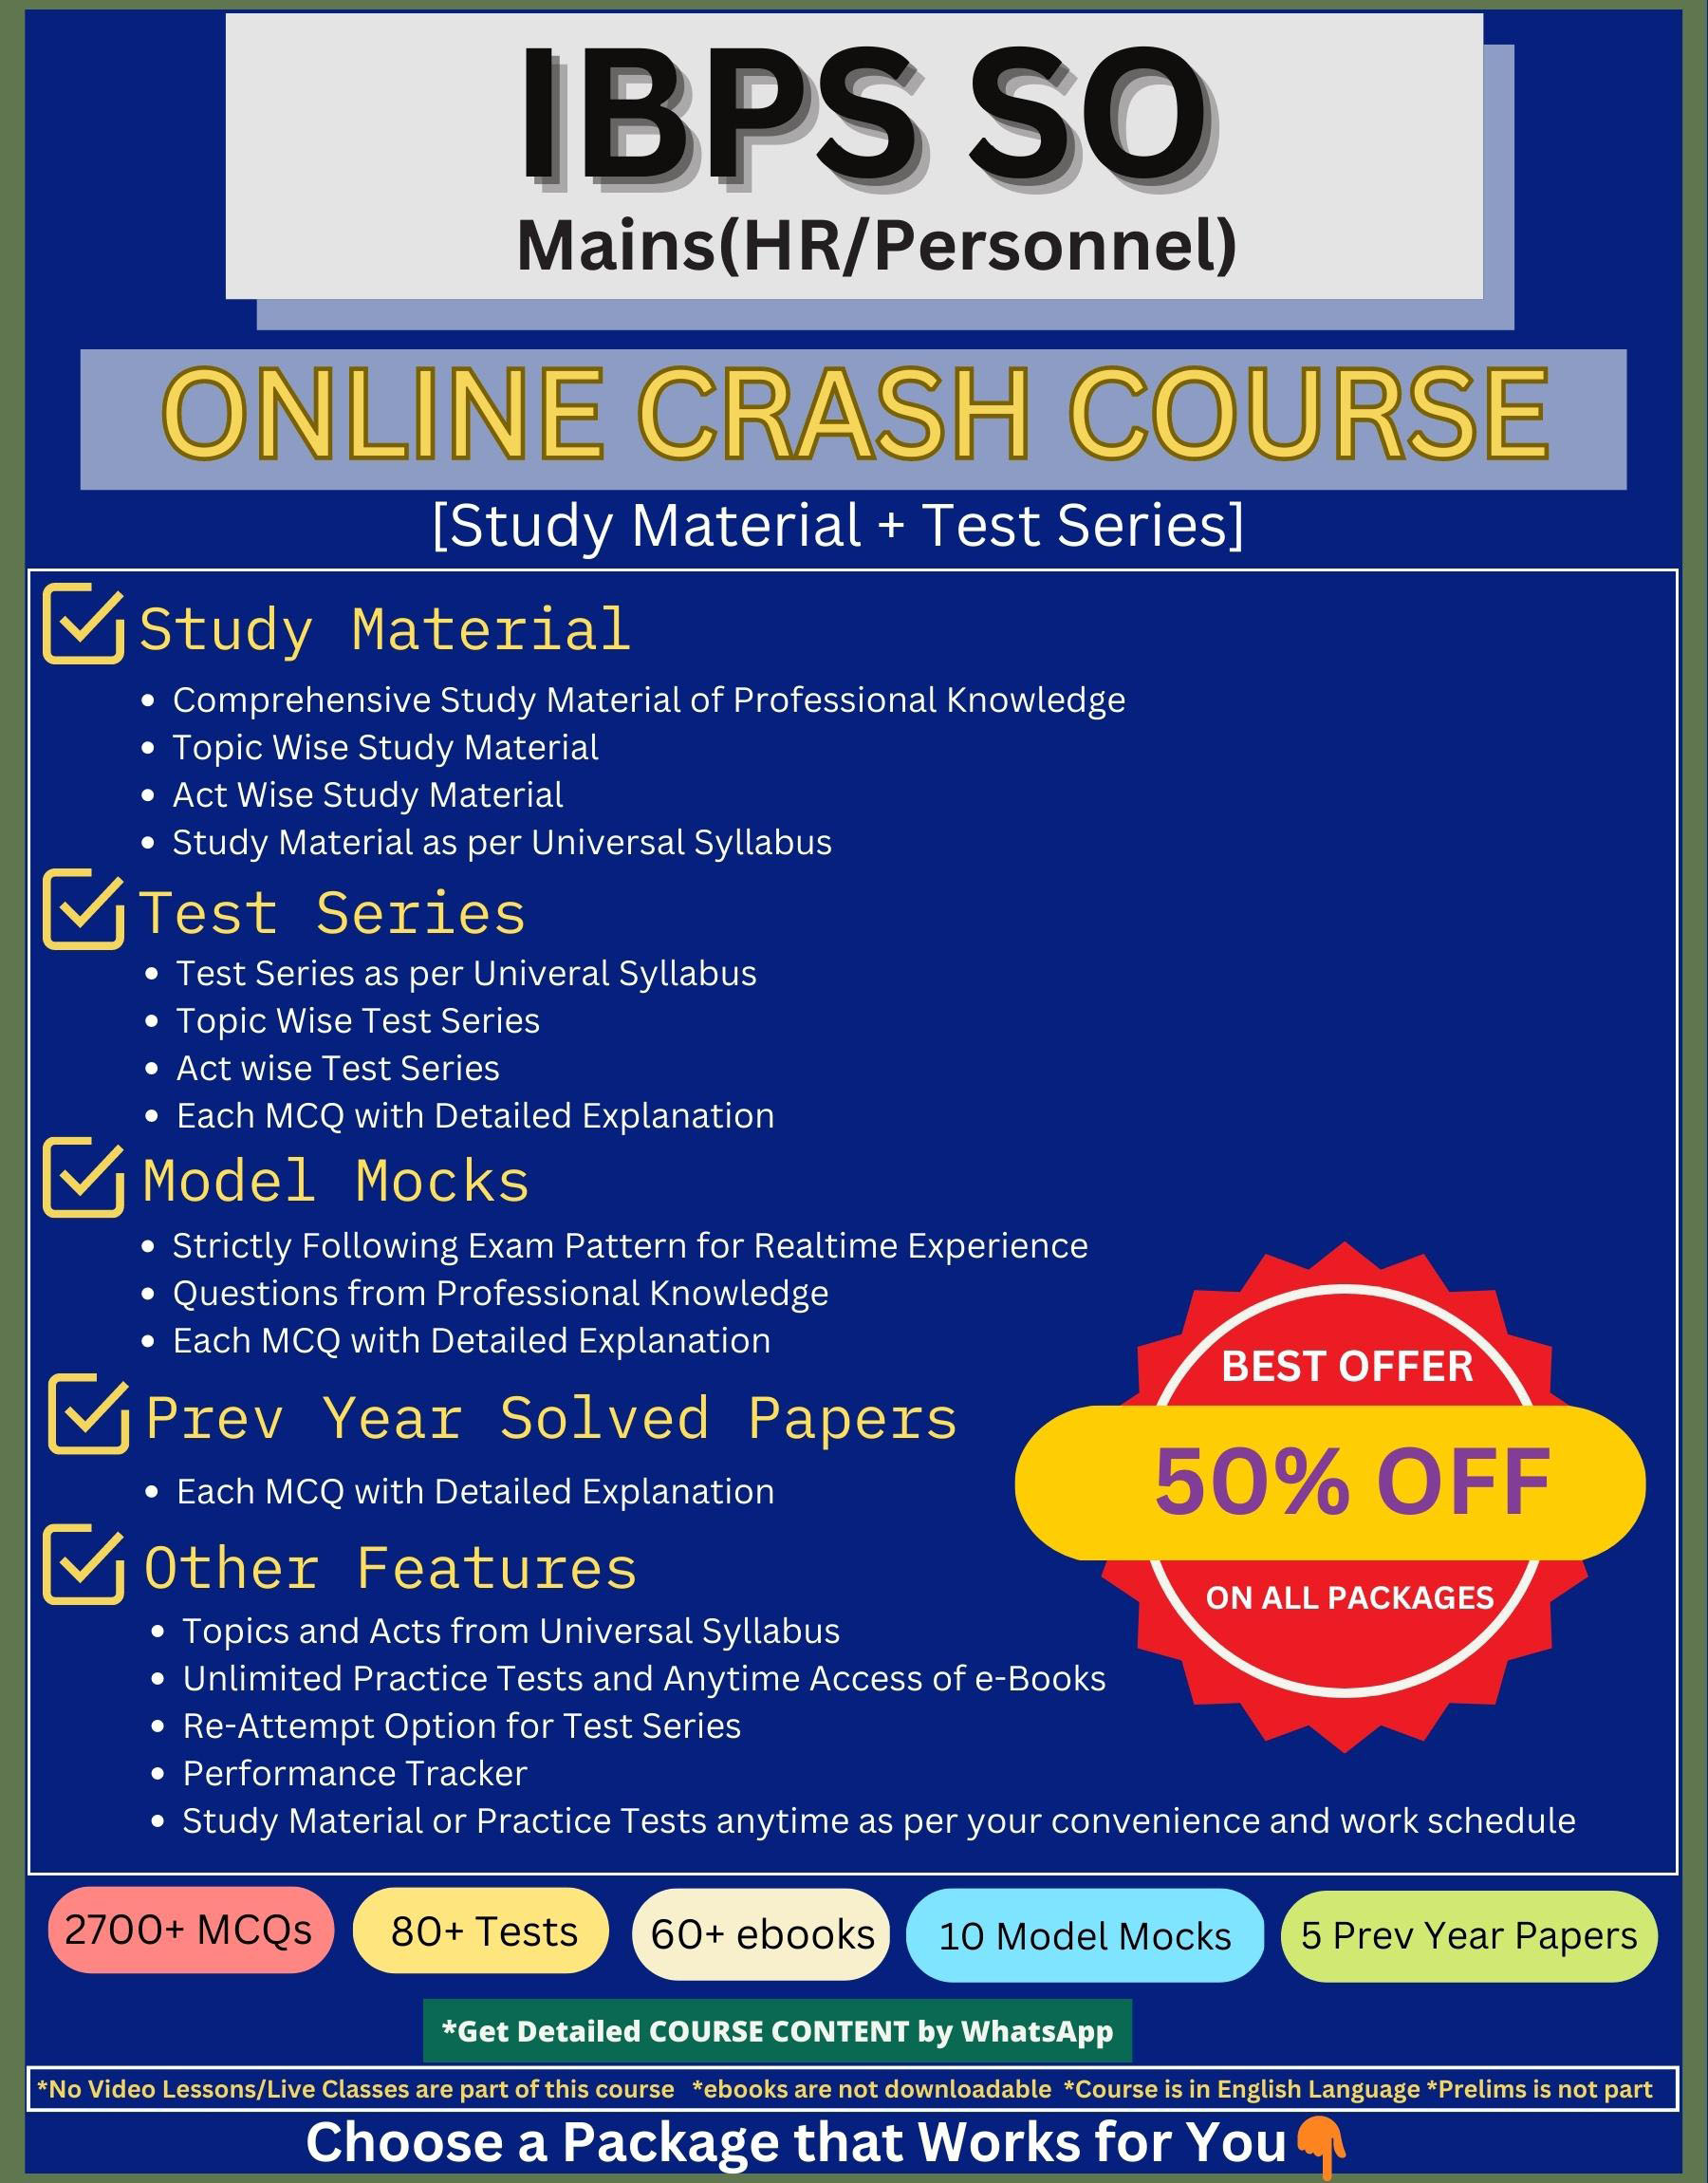 Online course with test series and study materials for IBPS SO Personnel HR Mains Exam